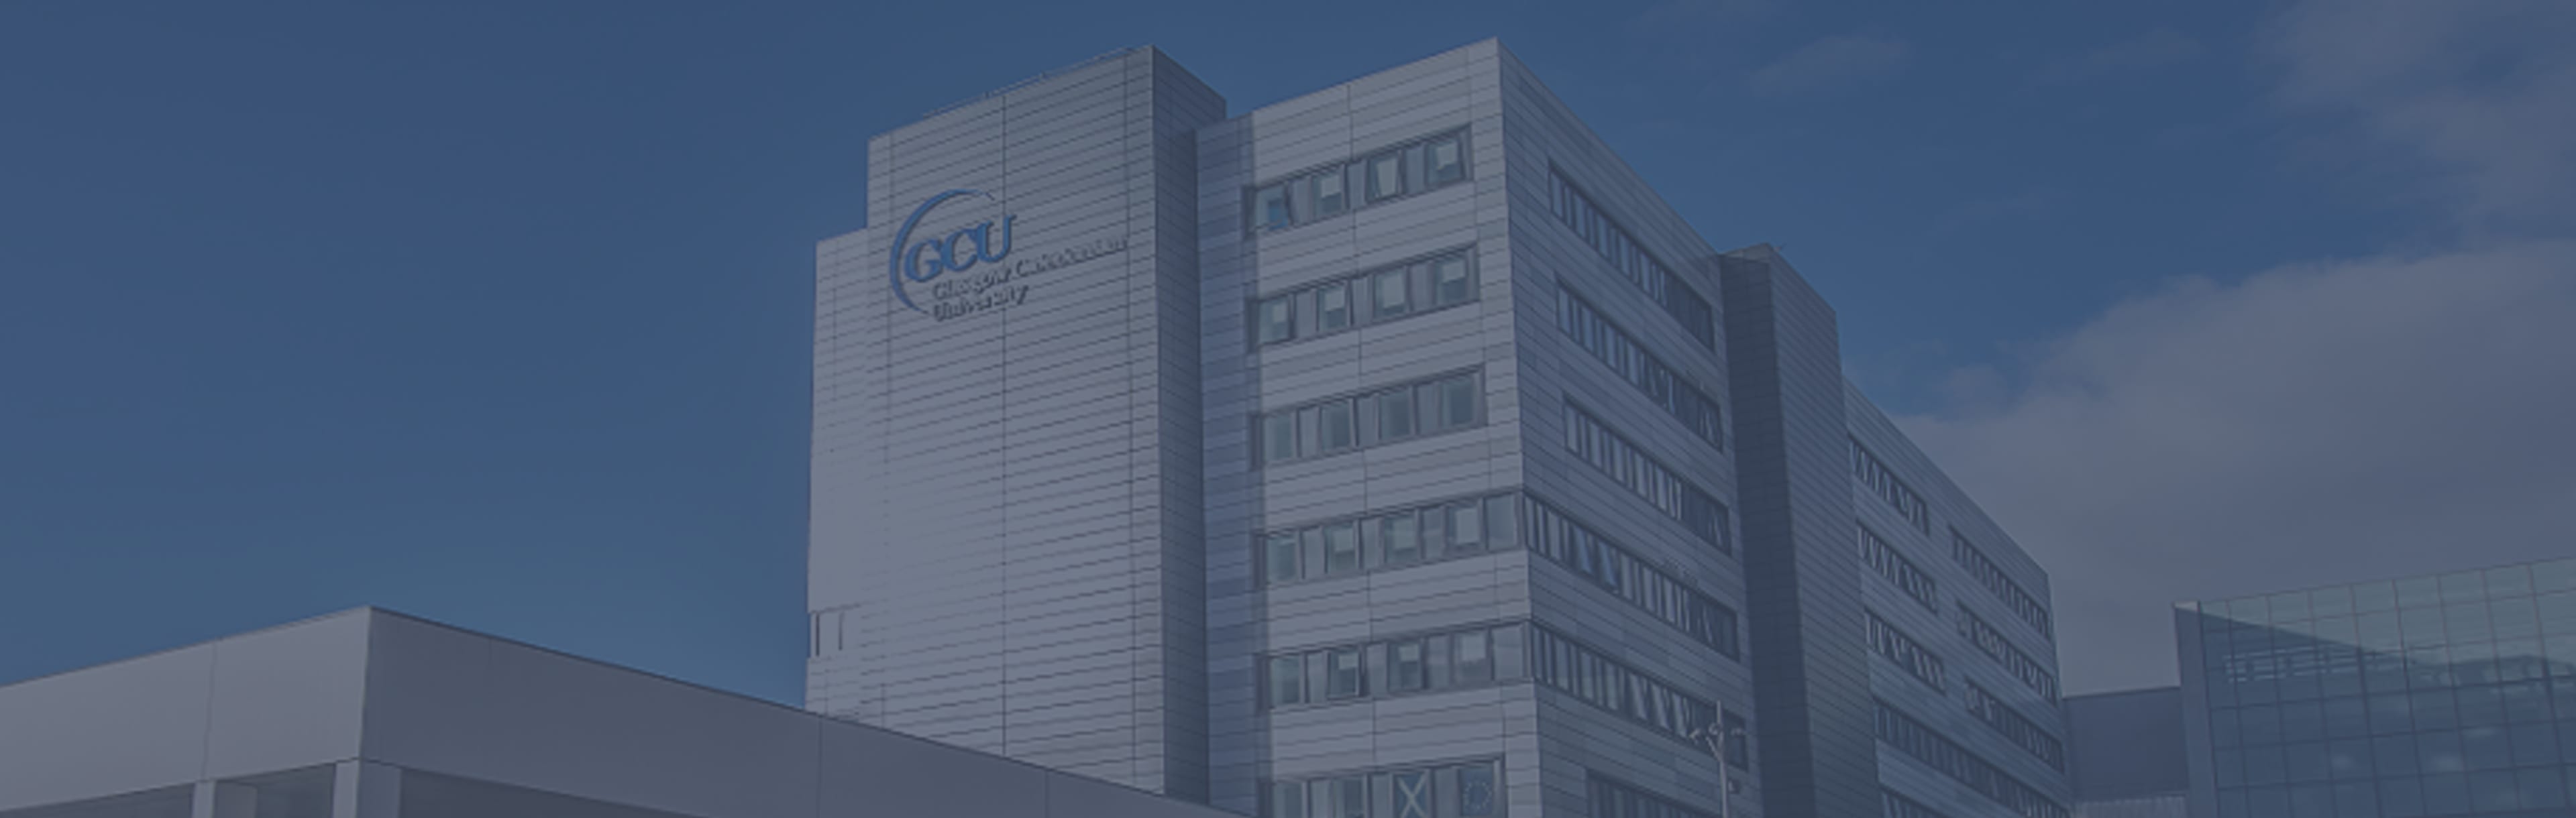 Glasgow Caledonian University - The School of Health and Life Sciences